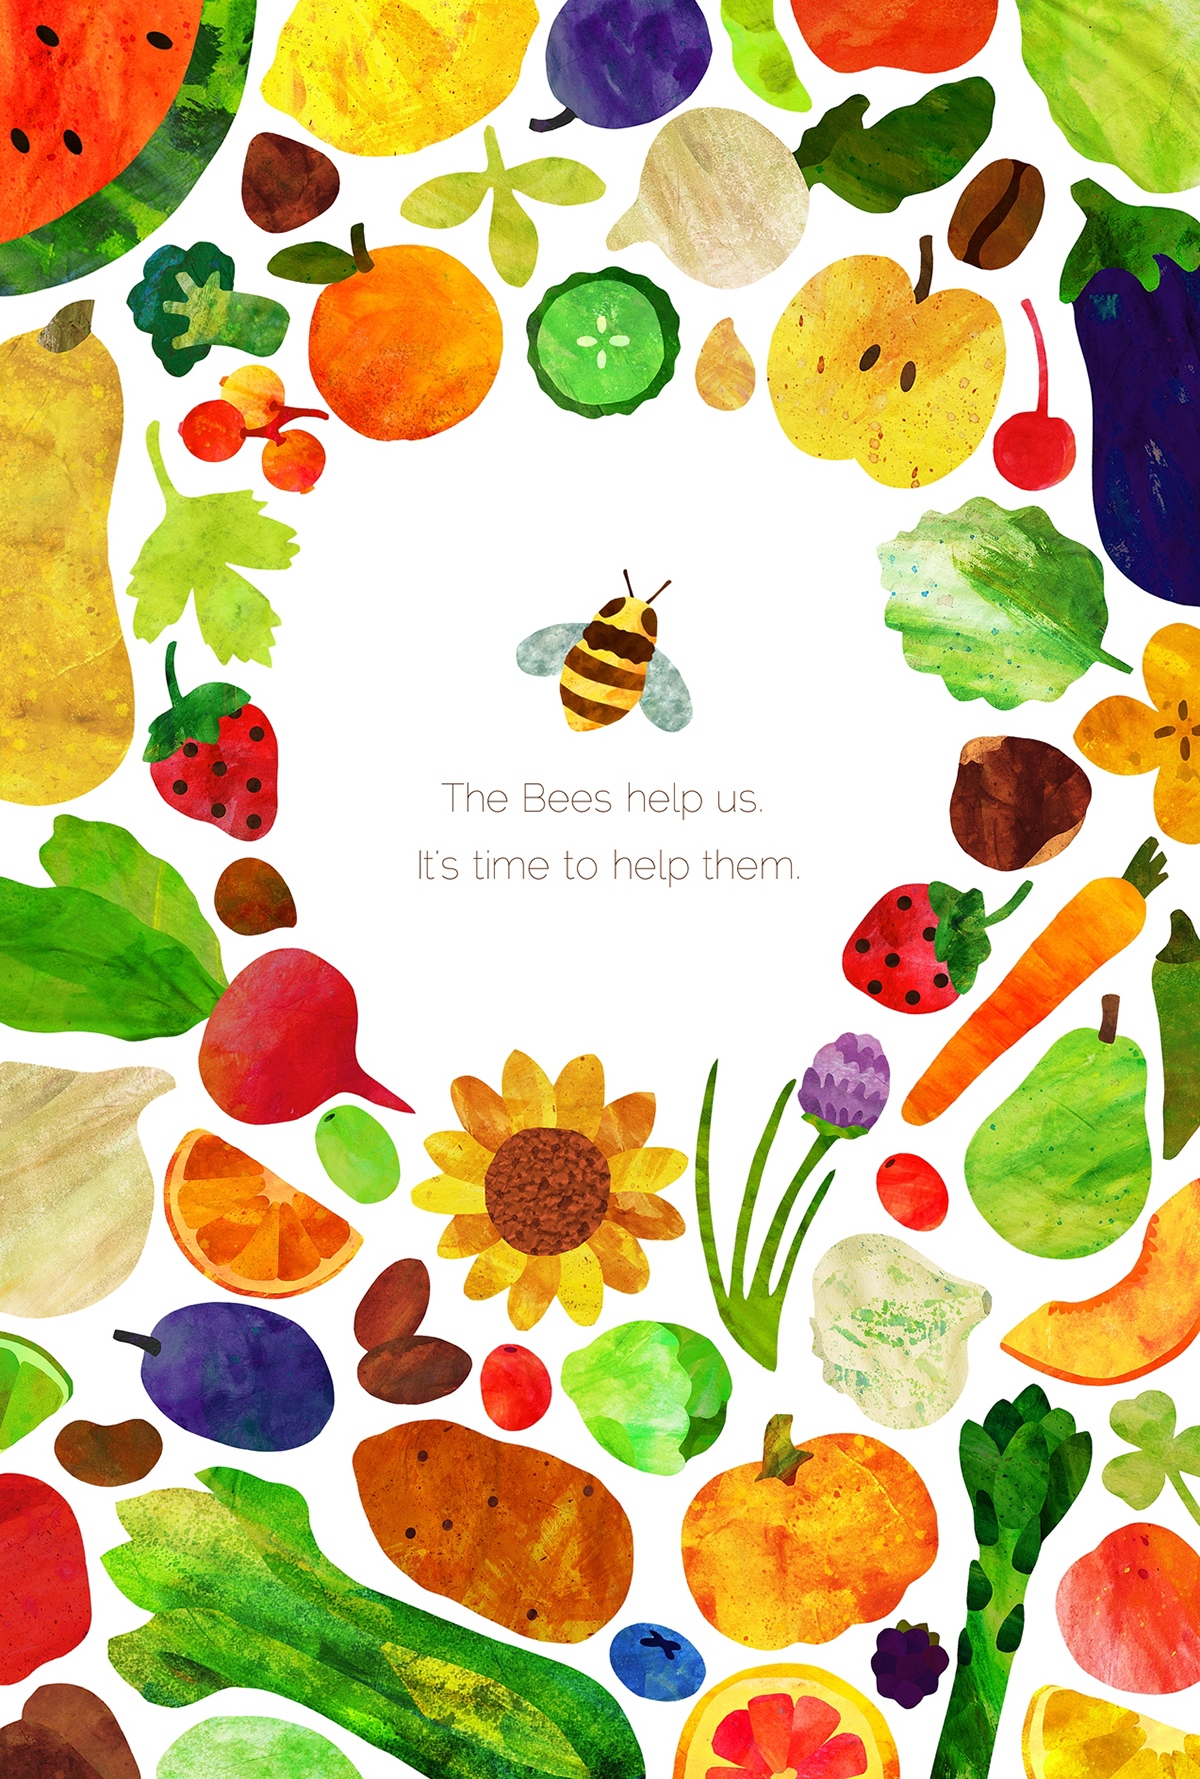 bee  Pollination  fruits vegetables  nuts  flowers  save